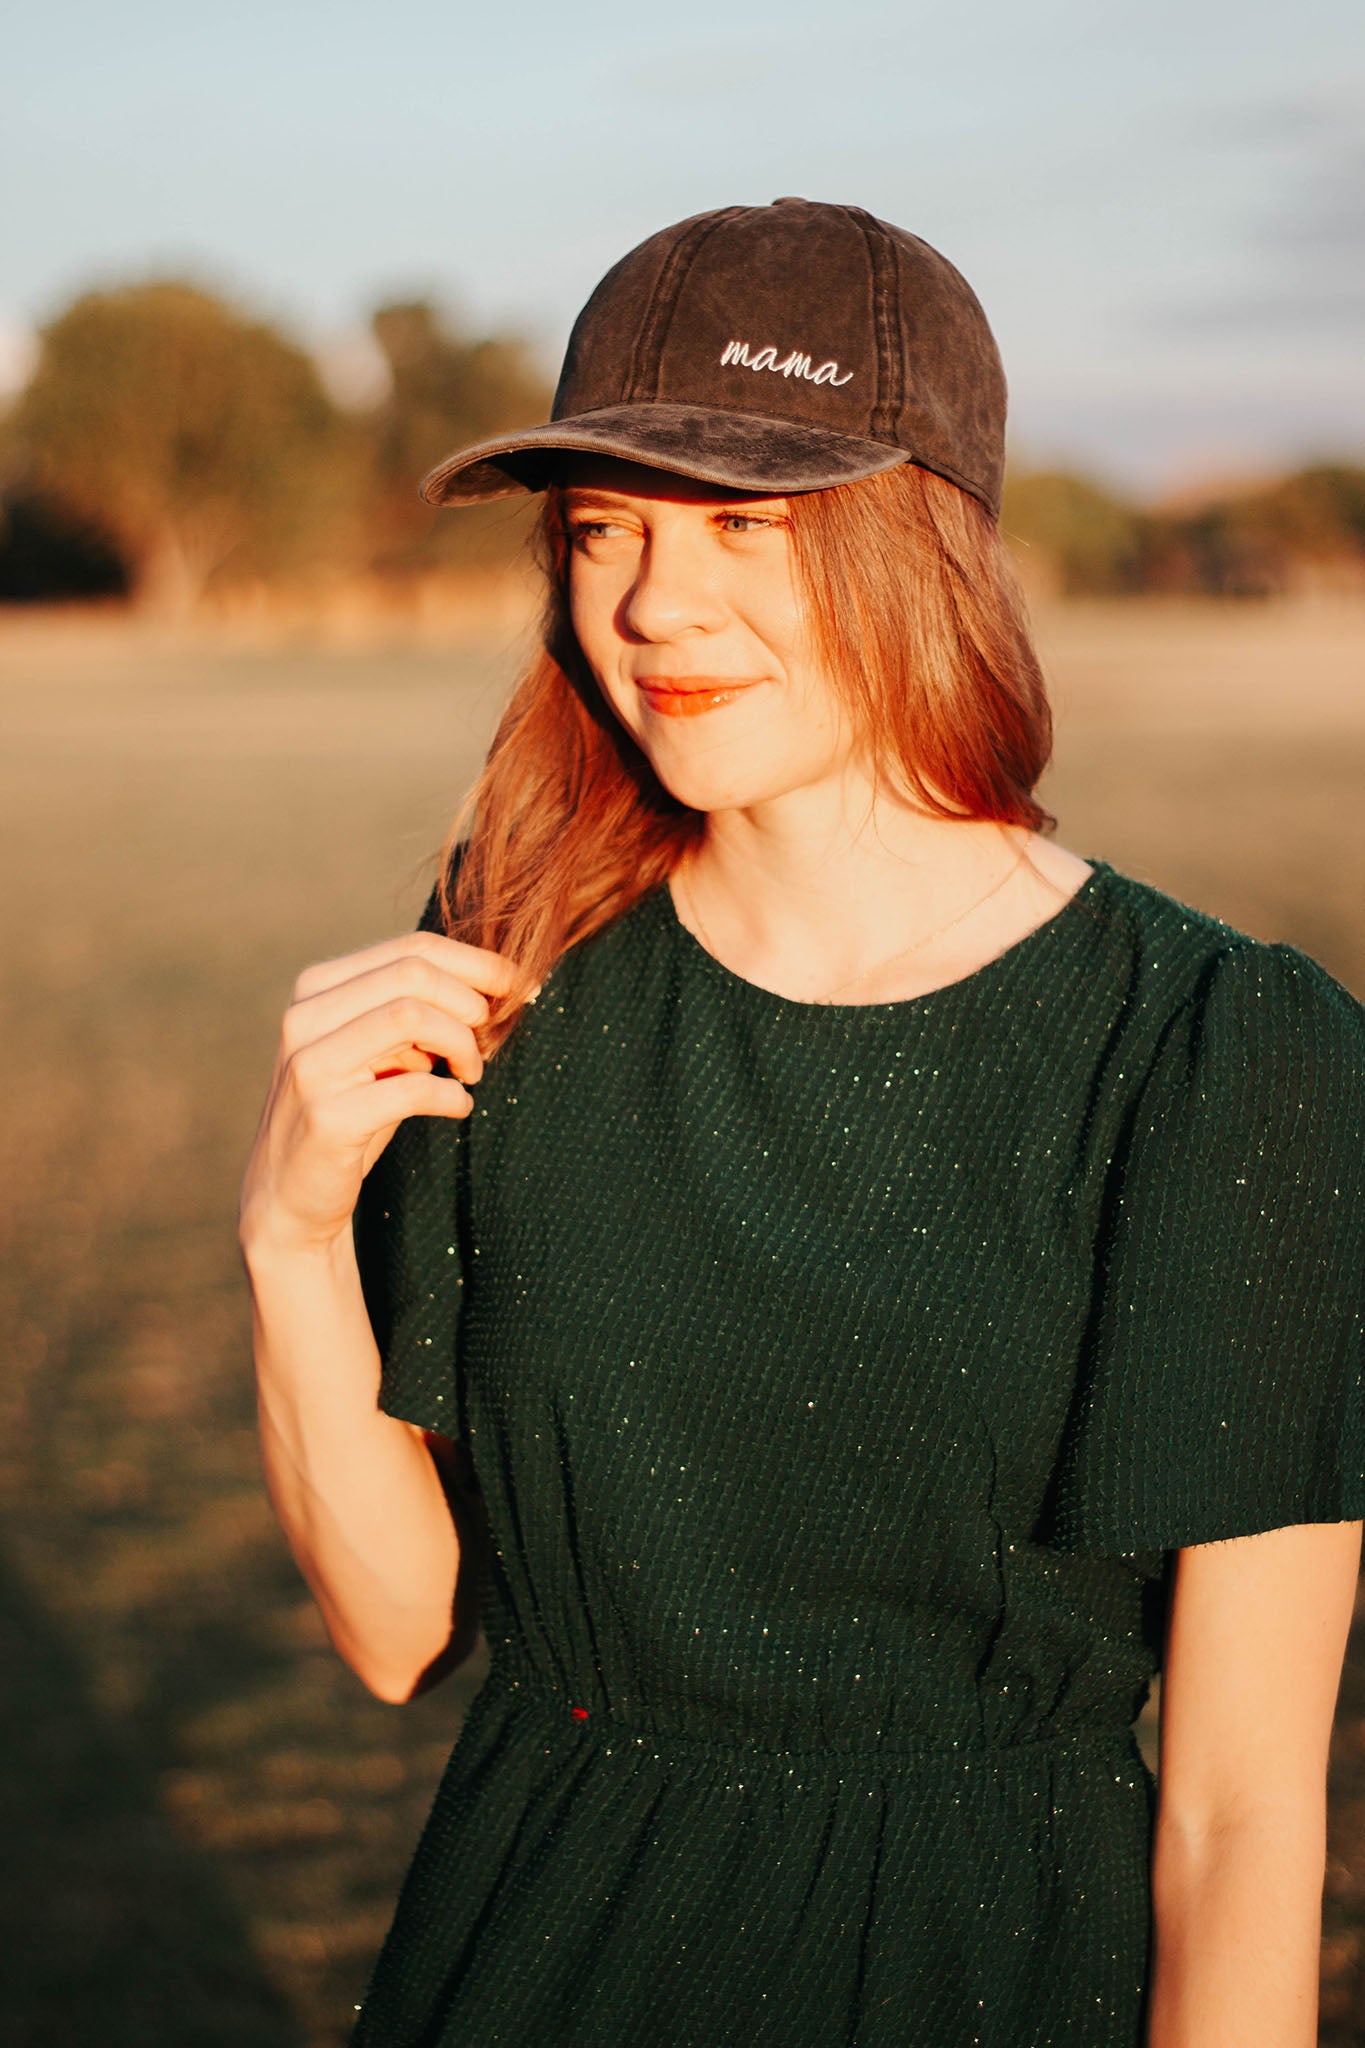 KENNA EMBROIDERED MAMA BASEBALL CAP IN CHARCOAL